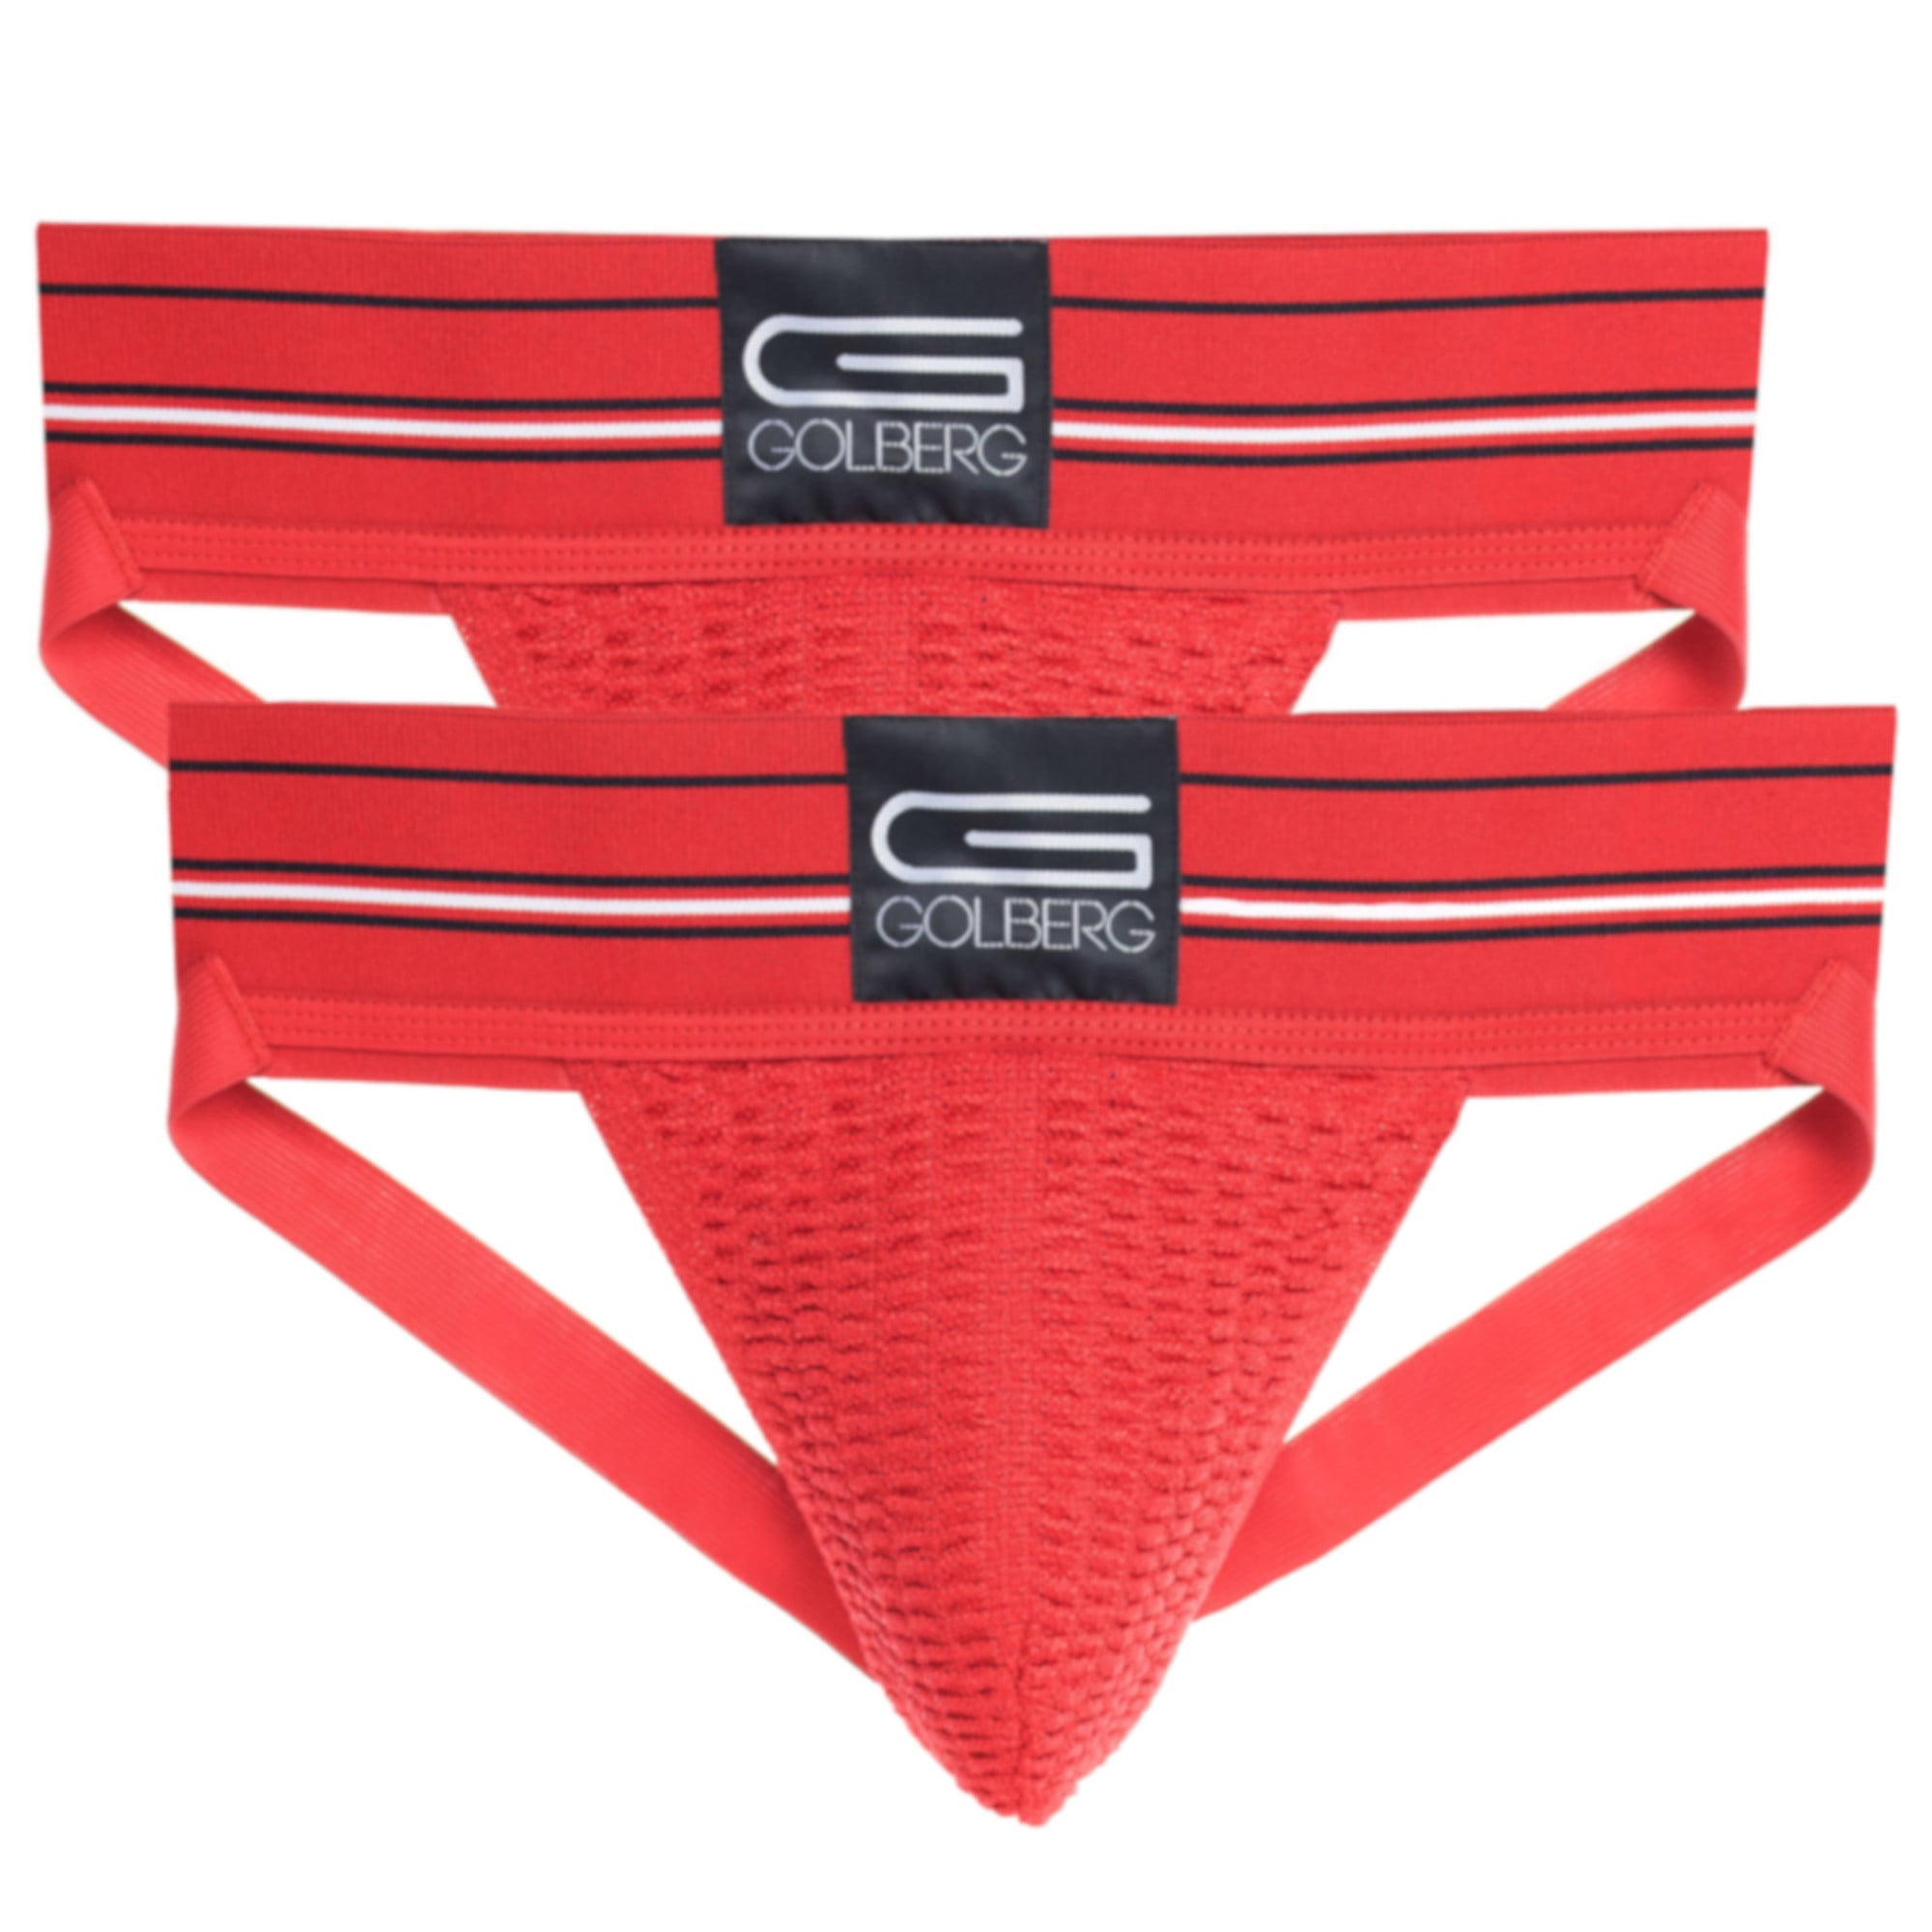 Contoured Waistband Golberg Athletic Supporters 4 Pack in Assorted Colors